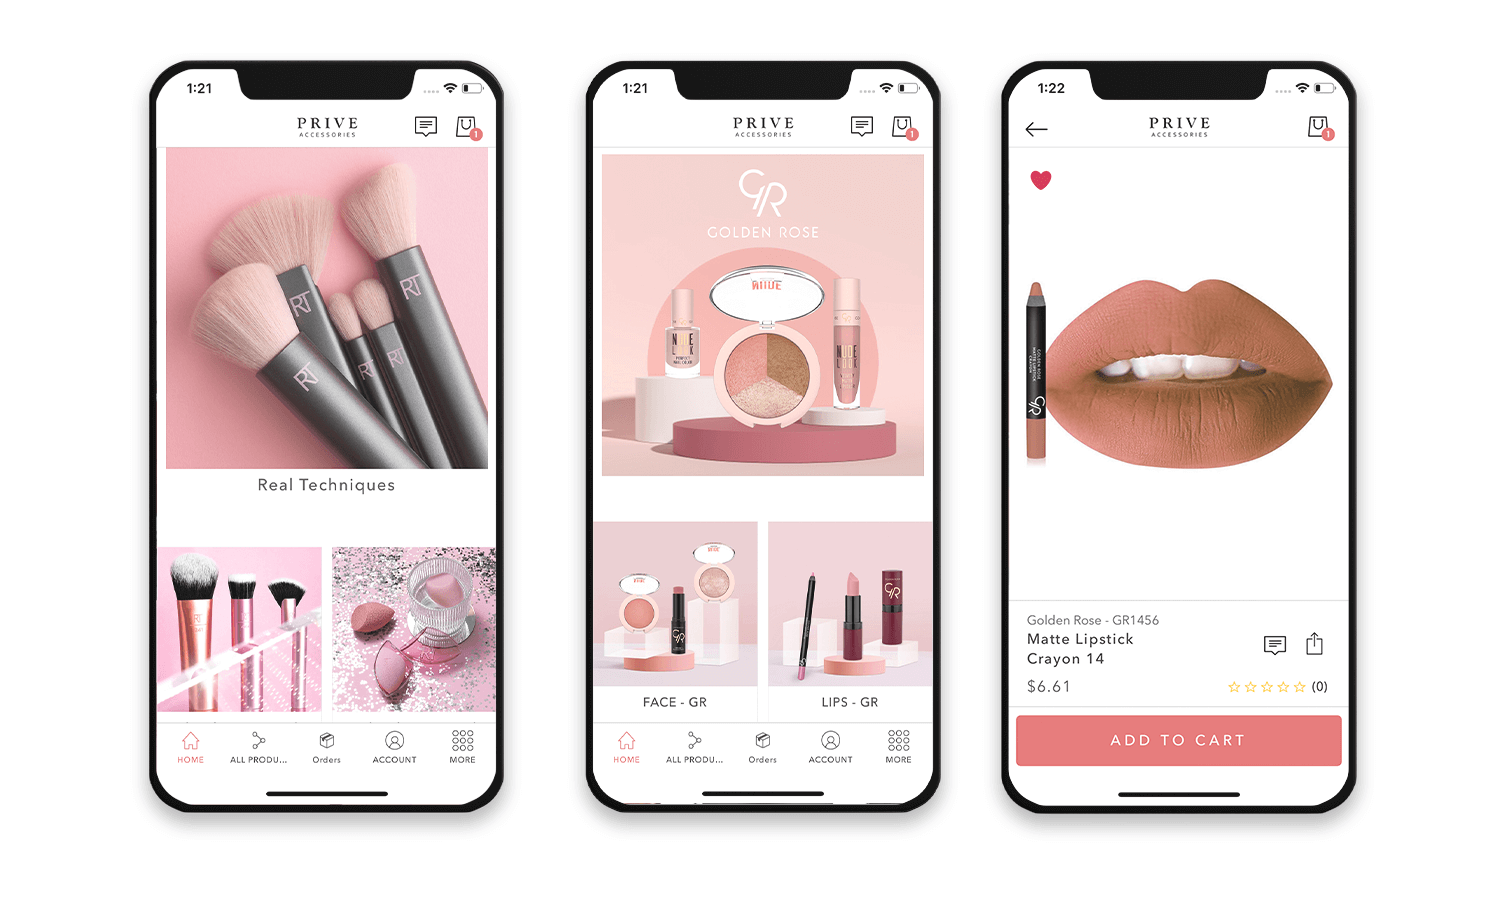 Top eCommerce Mobile App Design Examples - Prive Accessories